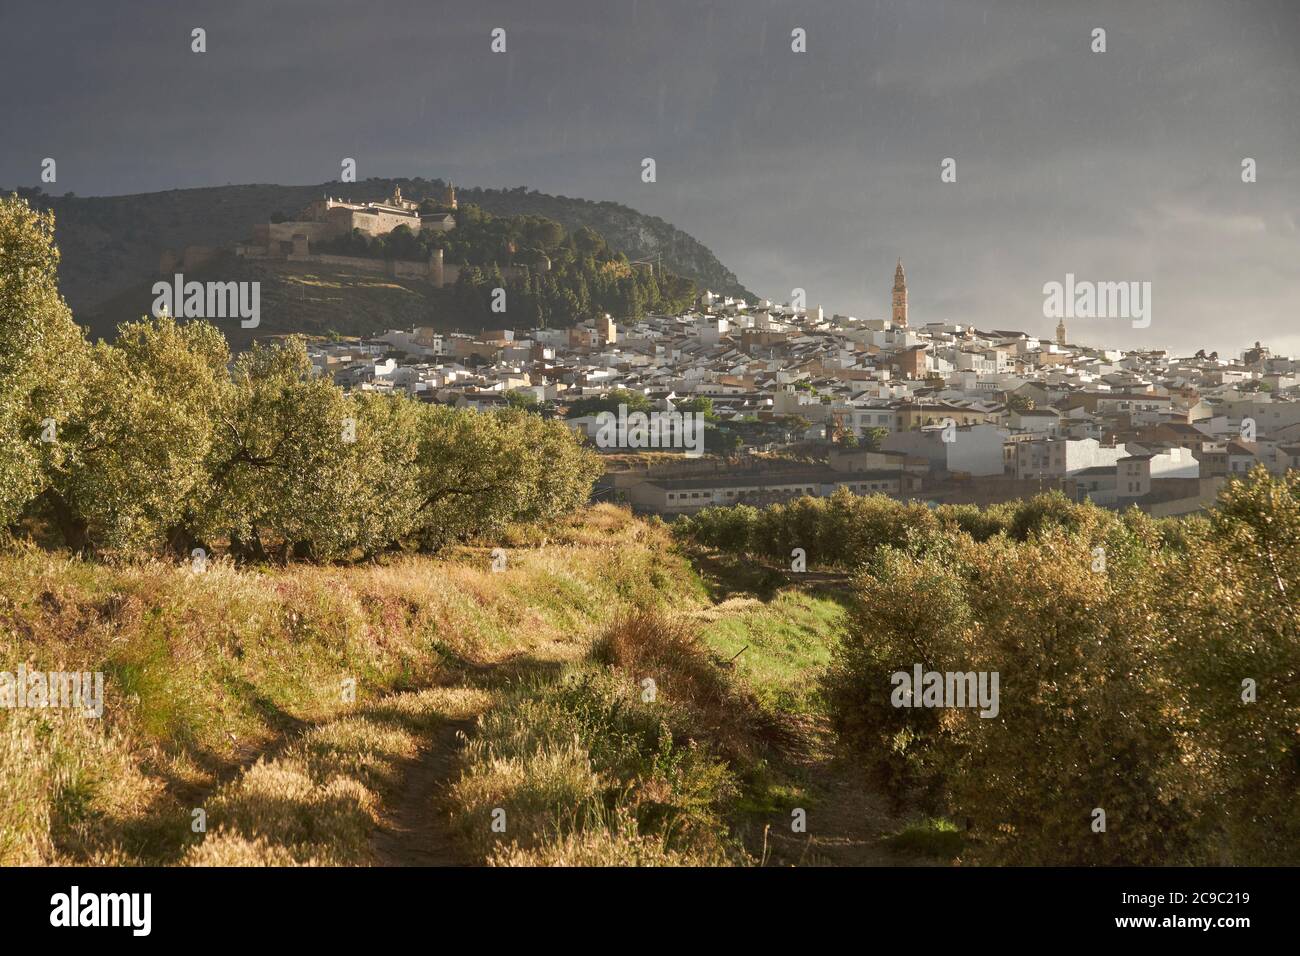 views from an olive grove of the city of Estepa. Andalusia, Spain Stock Photo